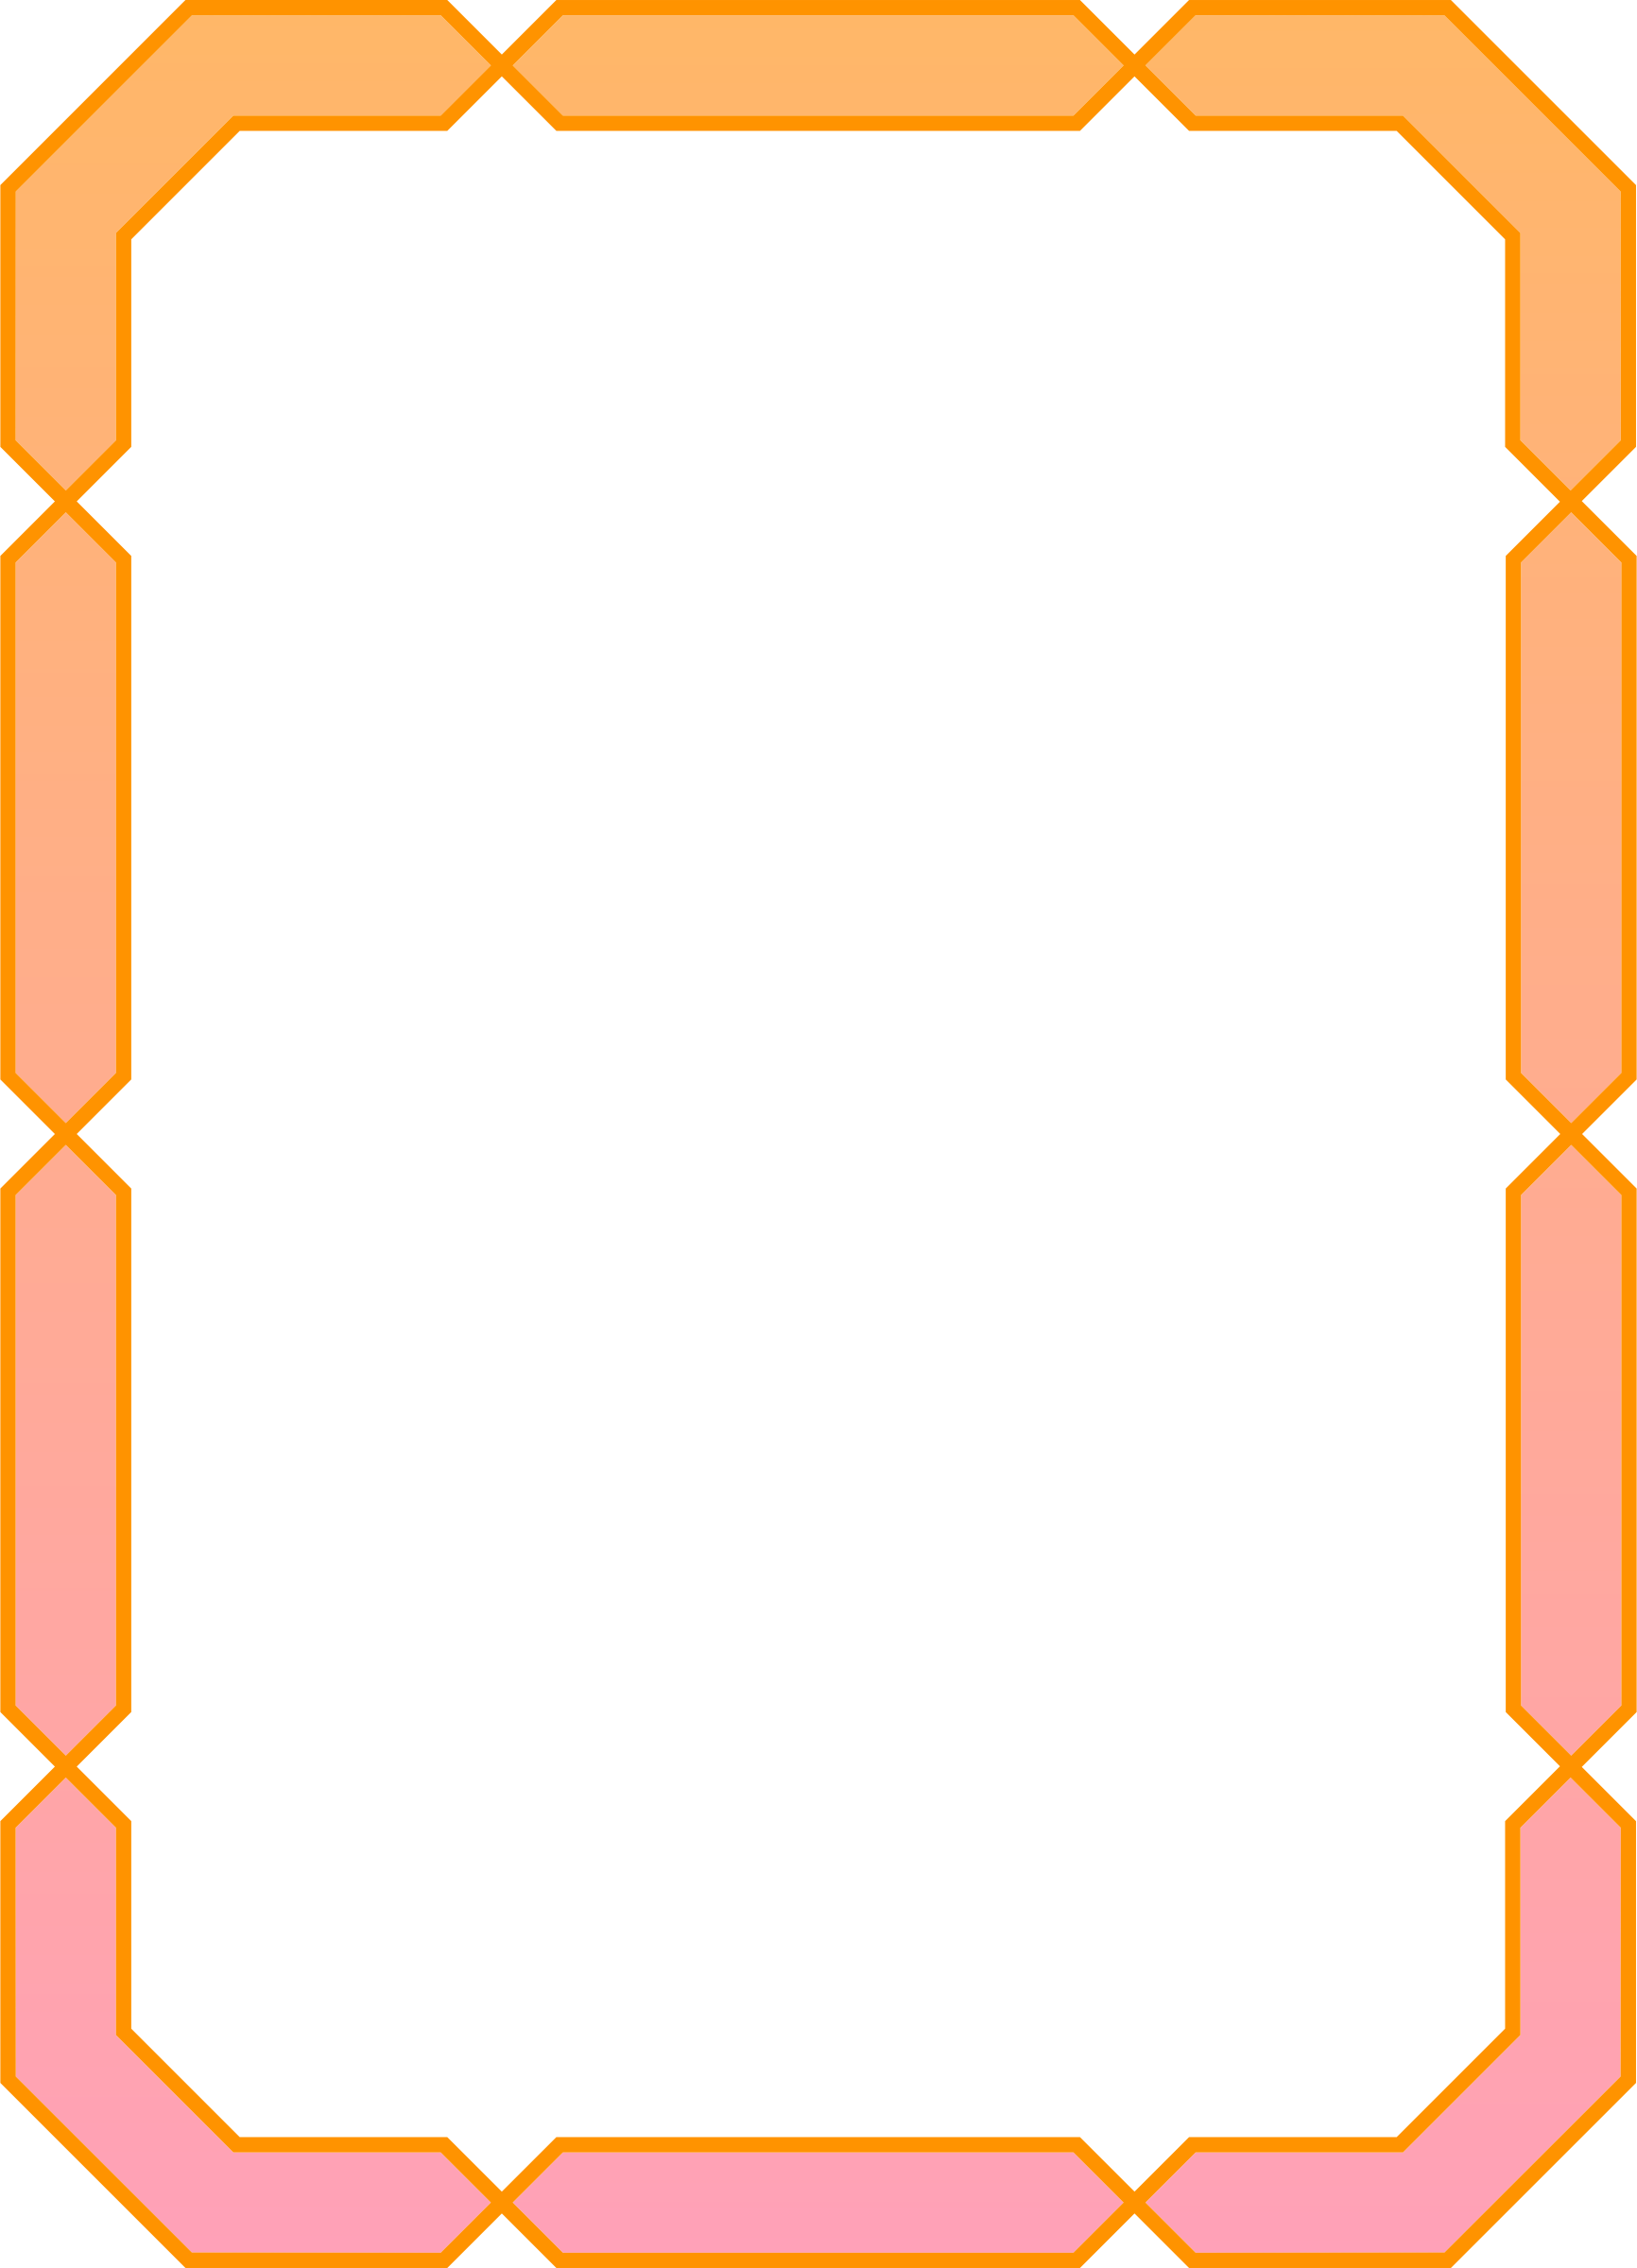 Clipart frame orange, Clipart frame orange Transparent FREE for